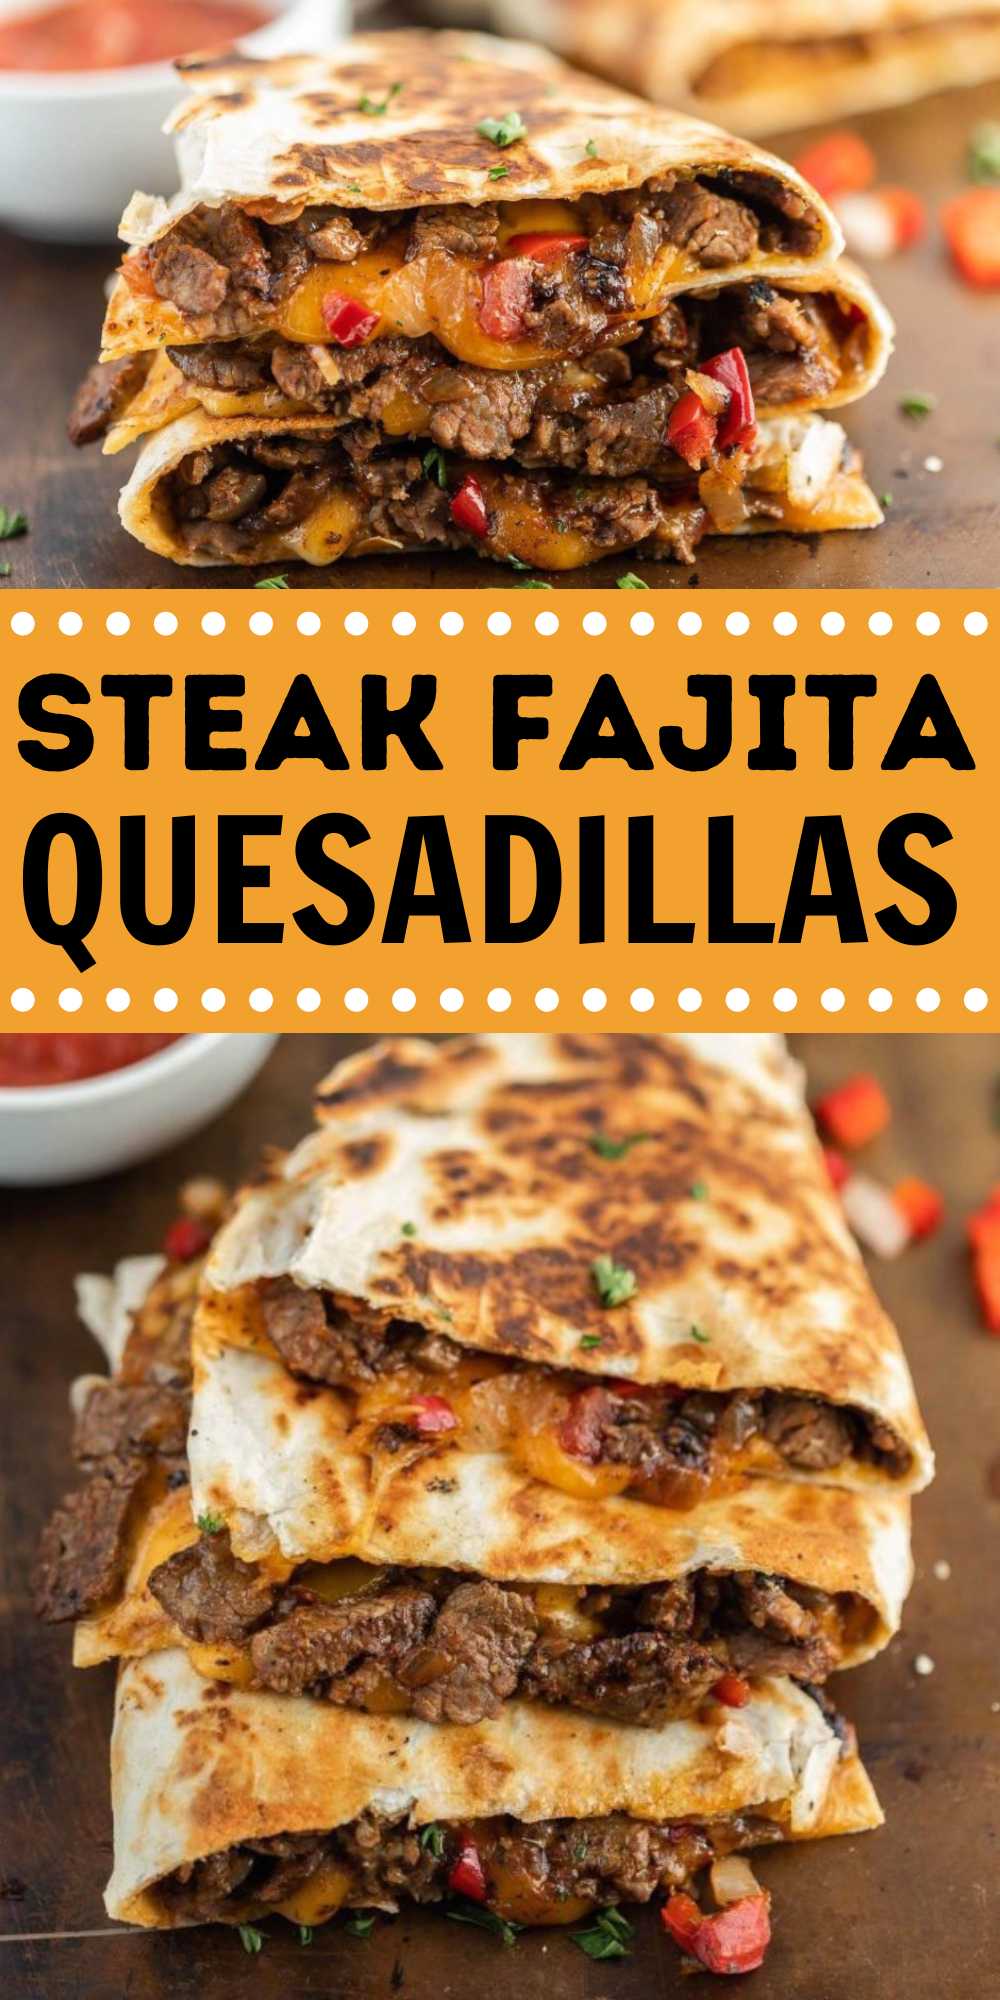 Make the perfect weeknight meal with these Steak Fajita Quesadillas. They are loaded with flavor and made with simple ingredients. These steak fajita quesadillas are restaurant quality but made at home. The skirt steak is seasoned and then cooked to perfection. The steak is tender and juicy and only takes a few minutes to cook. #eatingonadime #steakfajitaquesadillas #quesadillas